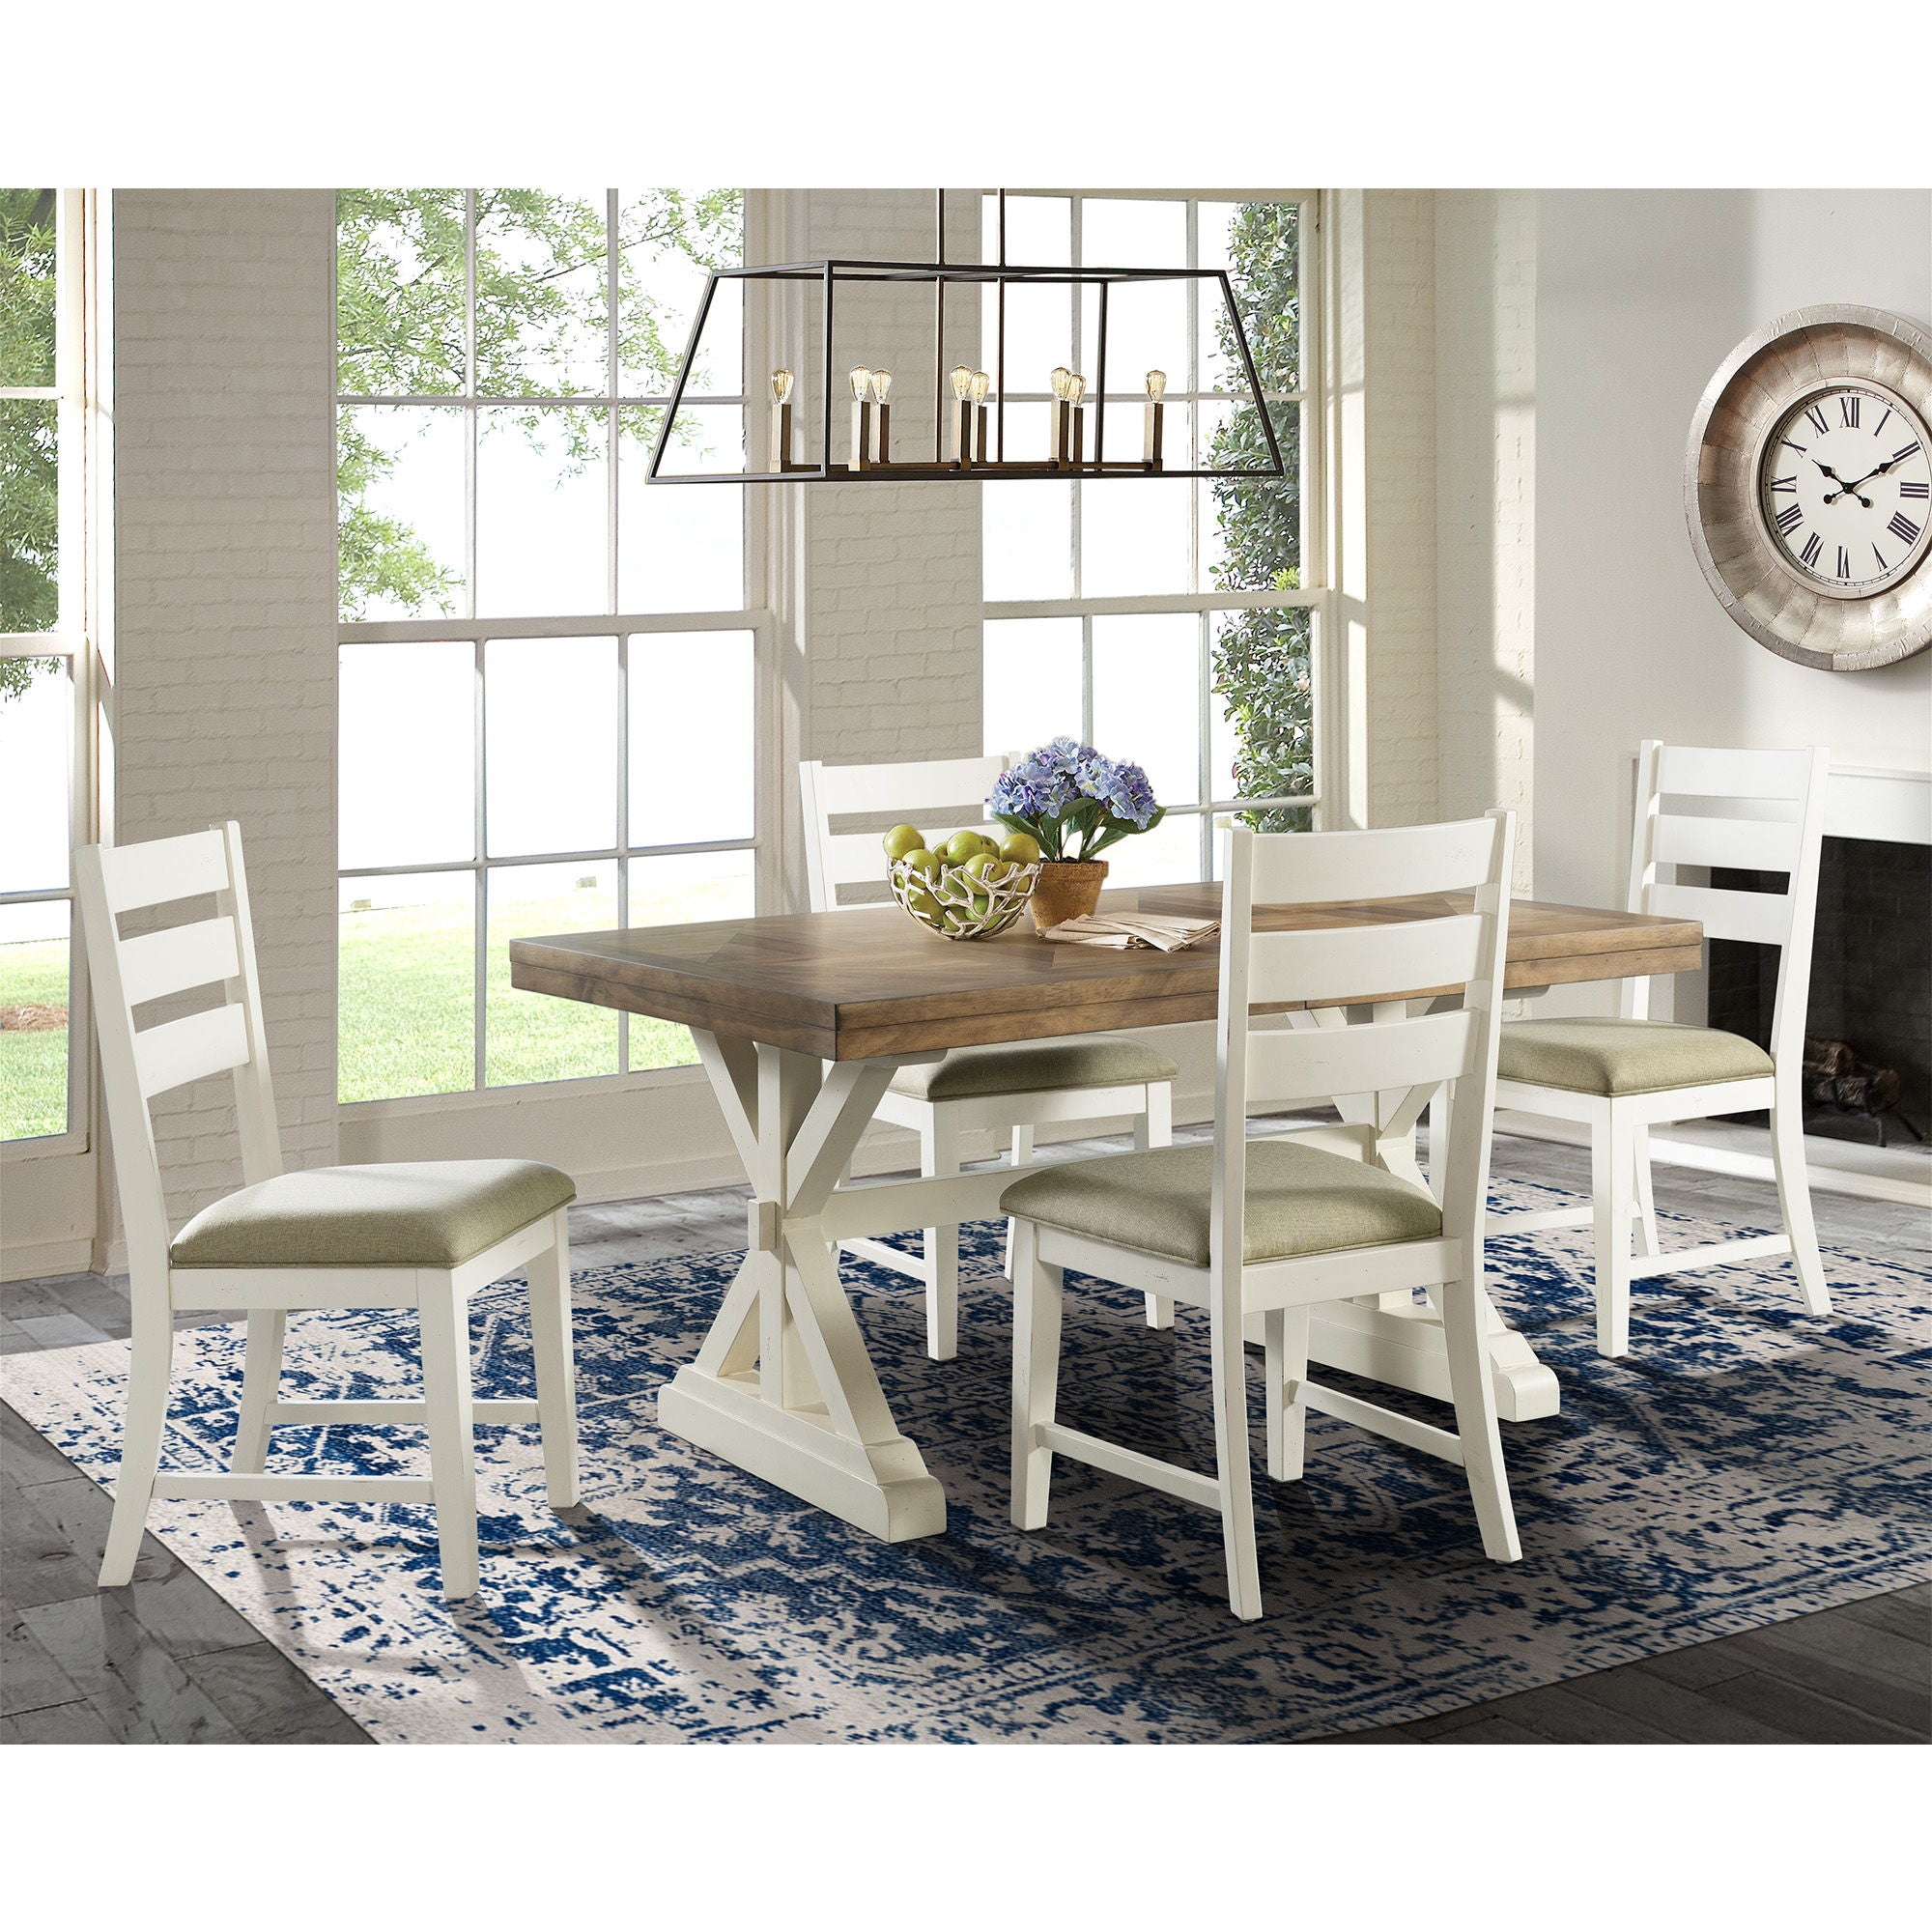 GrandCA HOME Rectangular Dining Table with 4 Chairs Dining Room